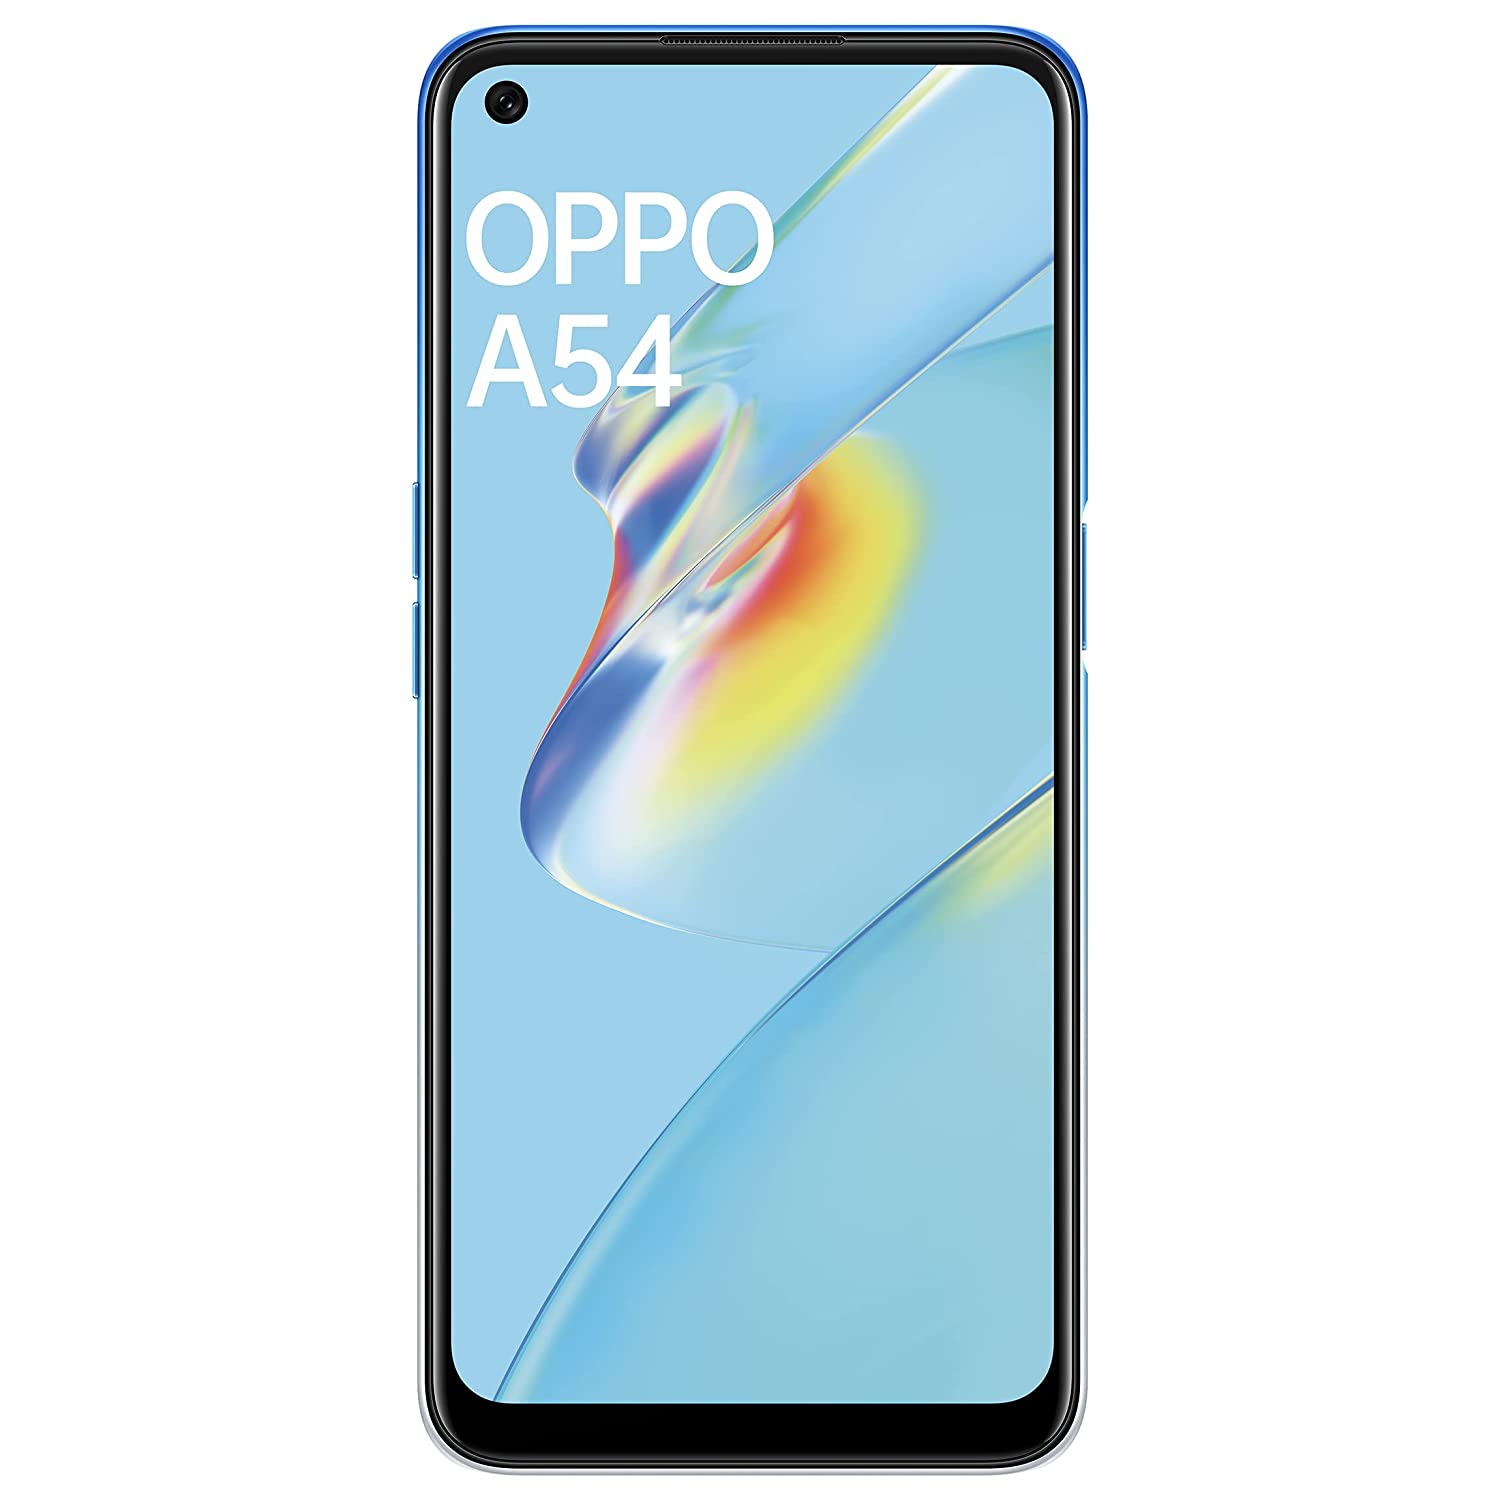 Oppo A54 mobile phones